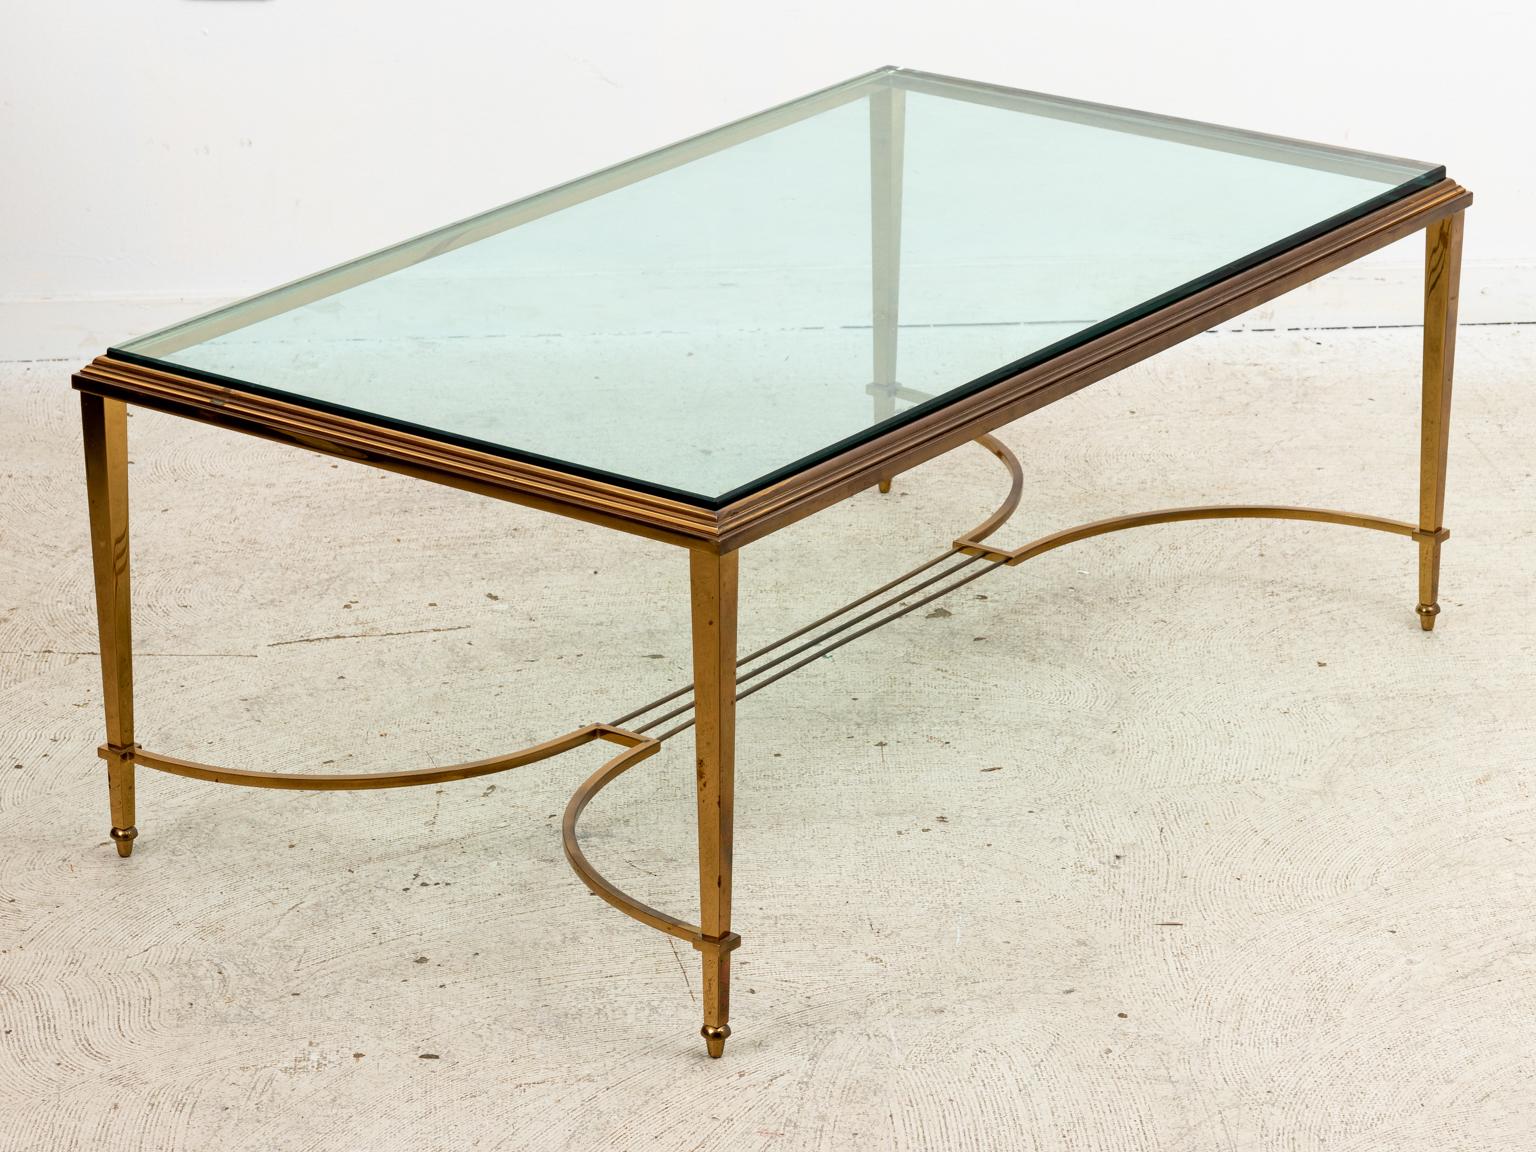 Glass top and brass frame coffee table with bottom c-shaped cross stretcher. The table is accented with molded trim on the tabletop and arrow feet. Please note of wear consistent with age including patina and oxidation to the metal.